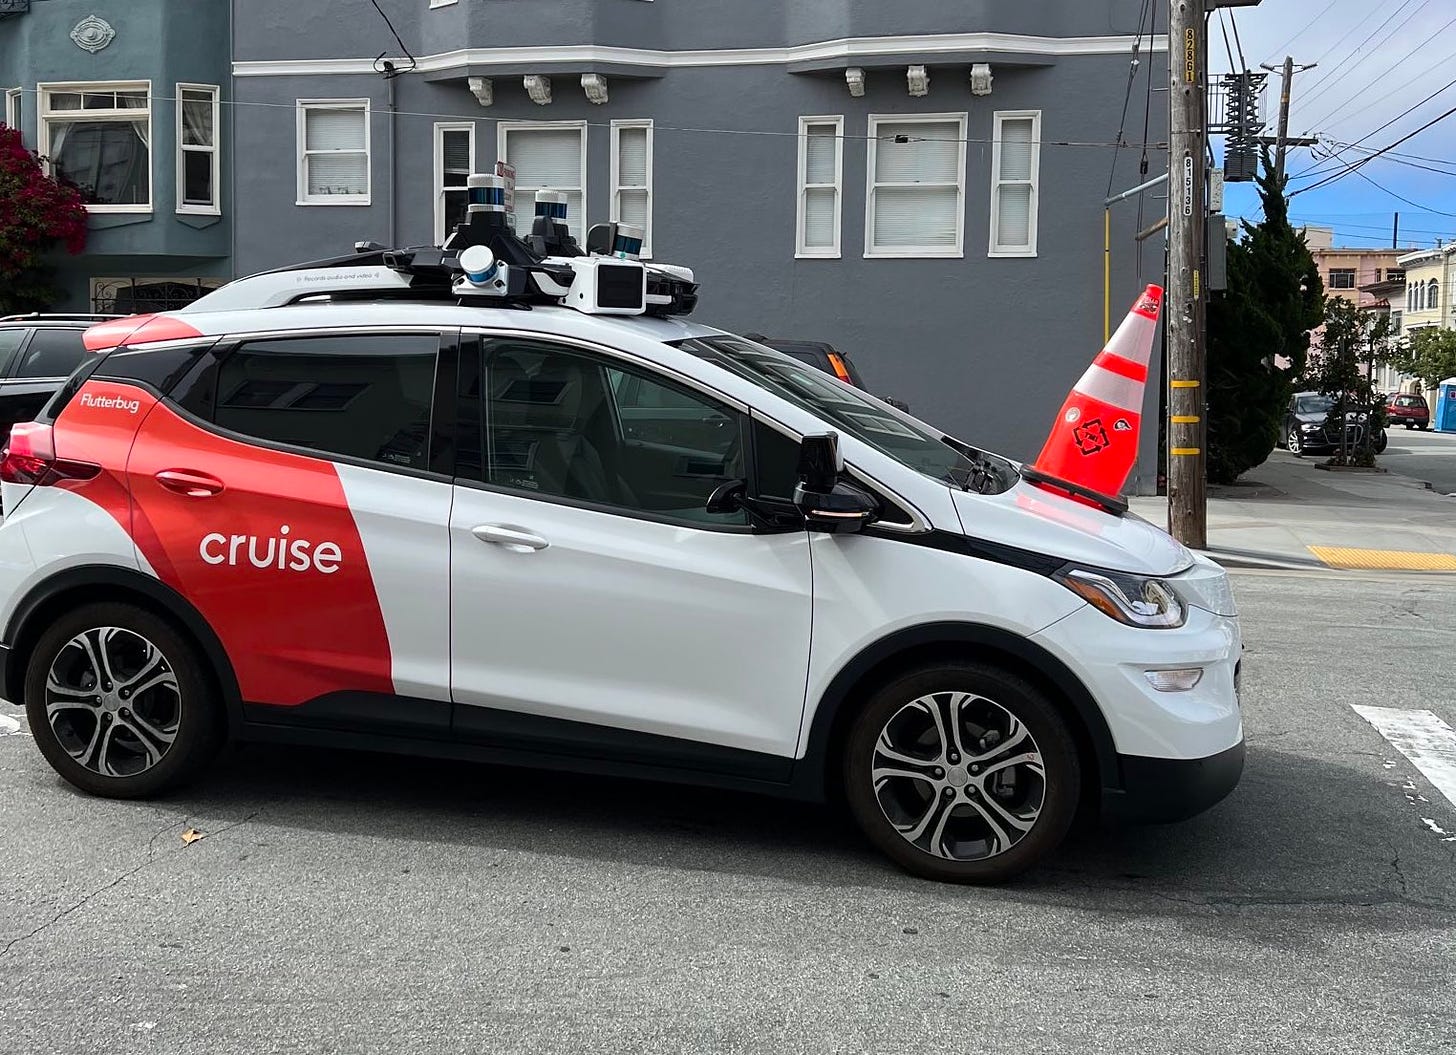 A driverless Cruise car stopped by a traffic cone on its hood.